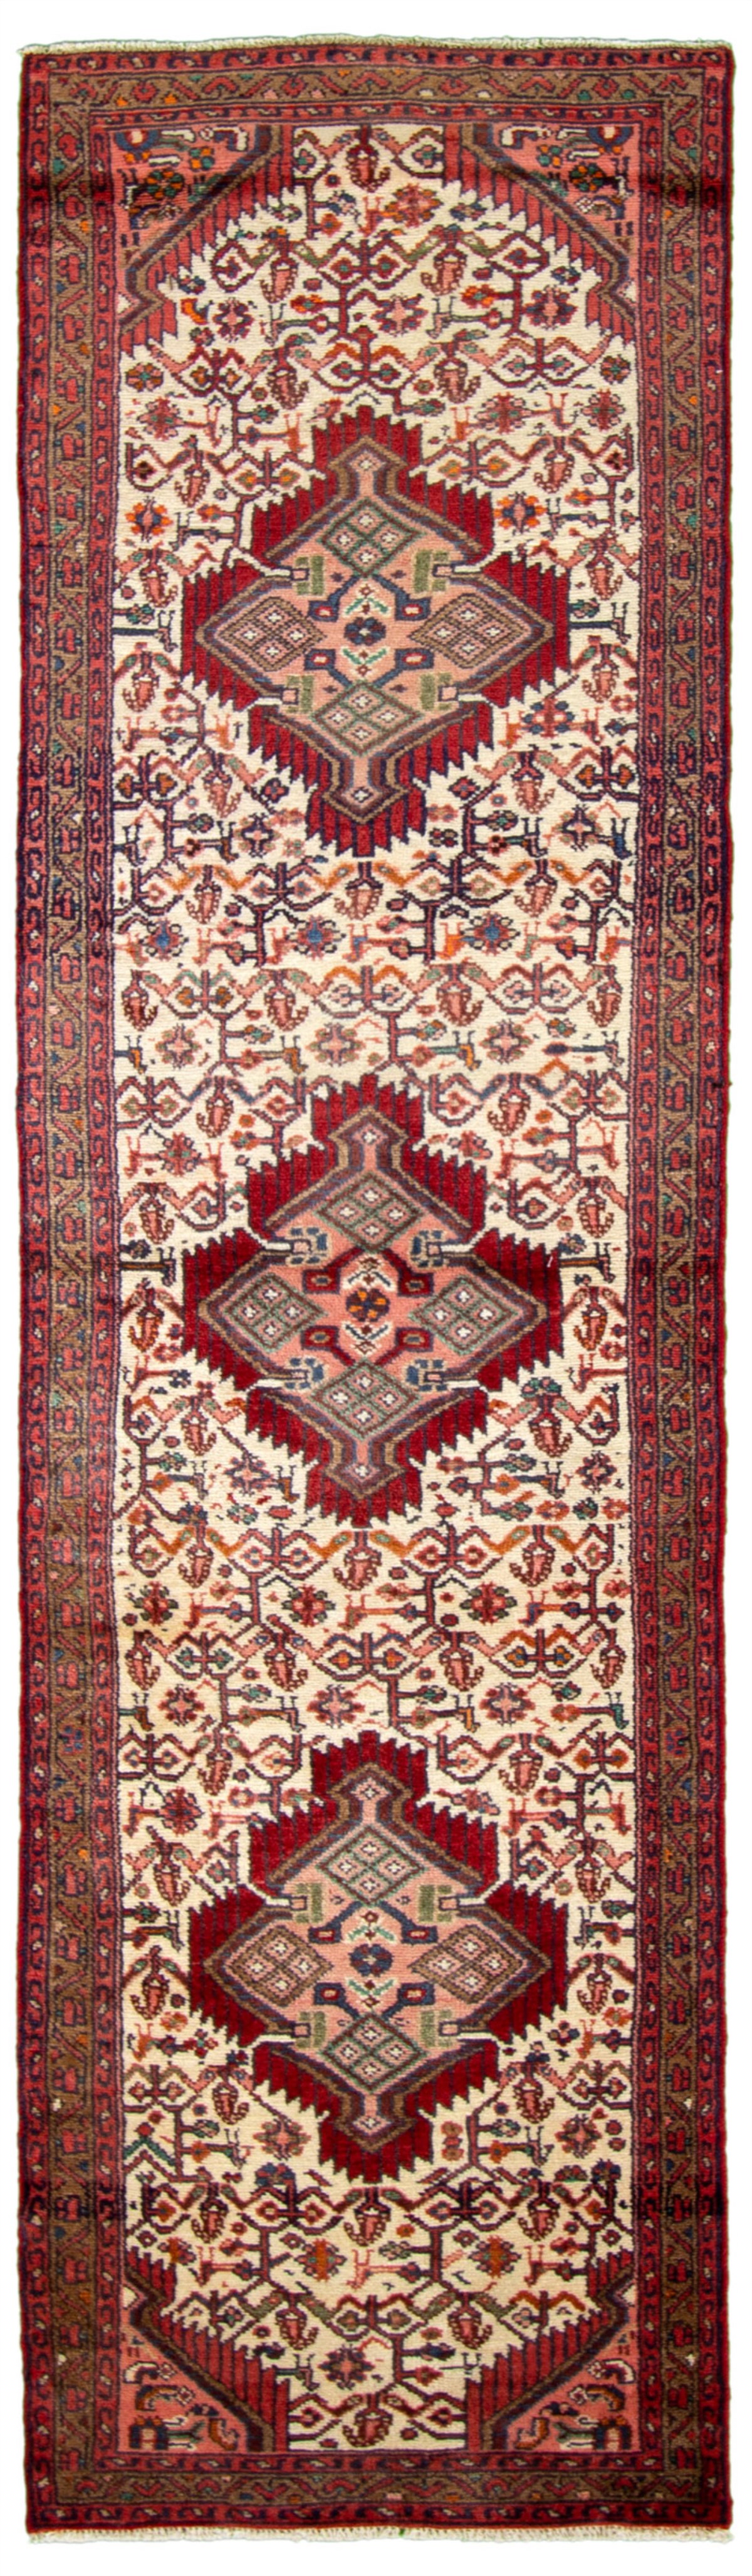 Hand-knotted Hamadan Red Wool Rug 2'5" x 8'11" Size: 2'5" x 8'11"  